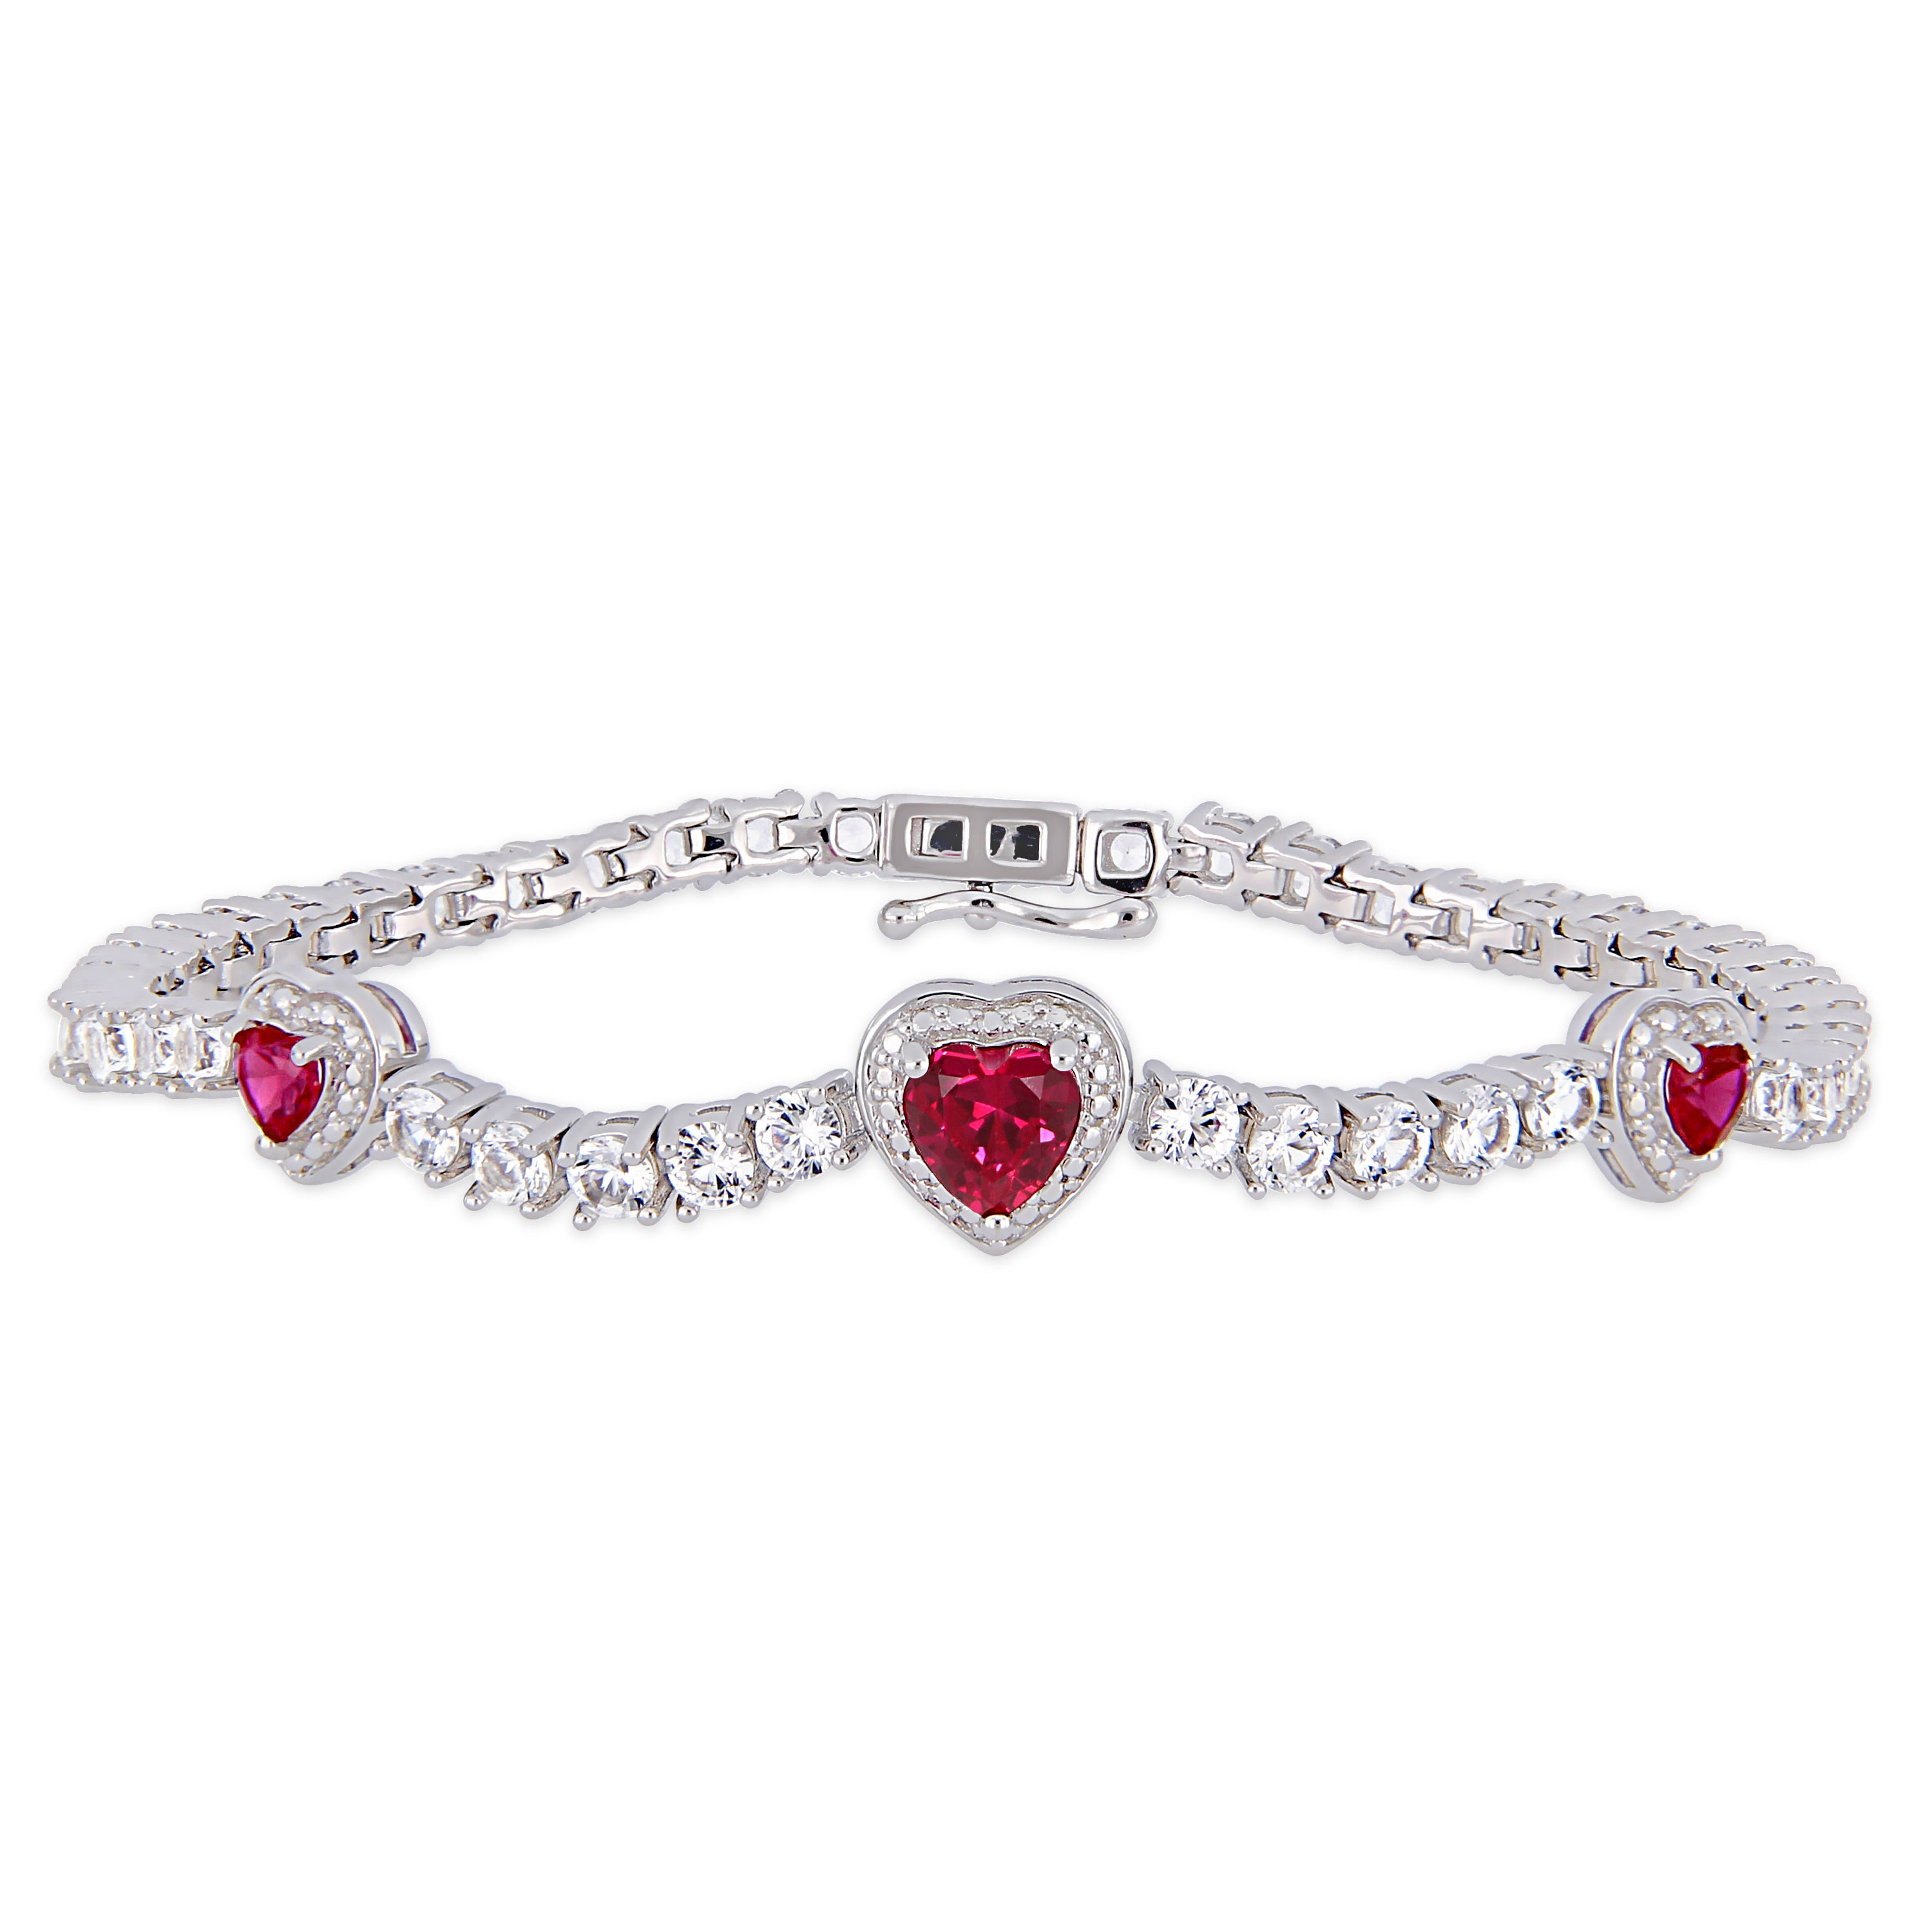 8 2/5 CT TGW Created Ruby and Created White Sapphire Stationed Triple Halo Heart Tennis Bracelet in Sterling Silver - 7 in.